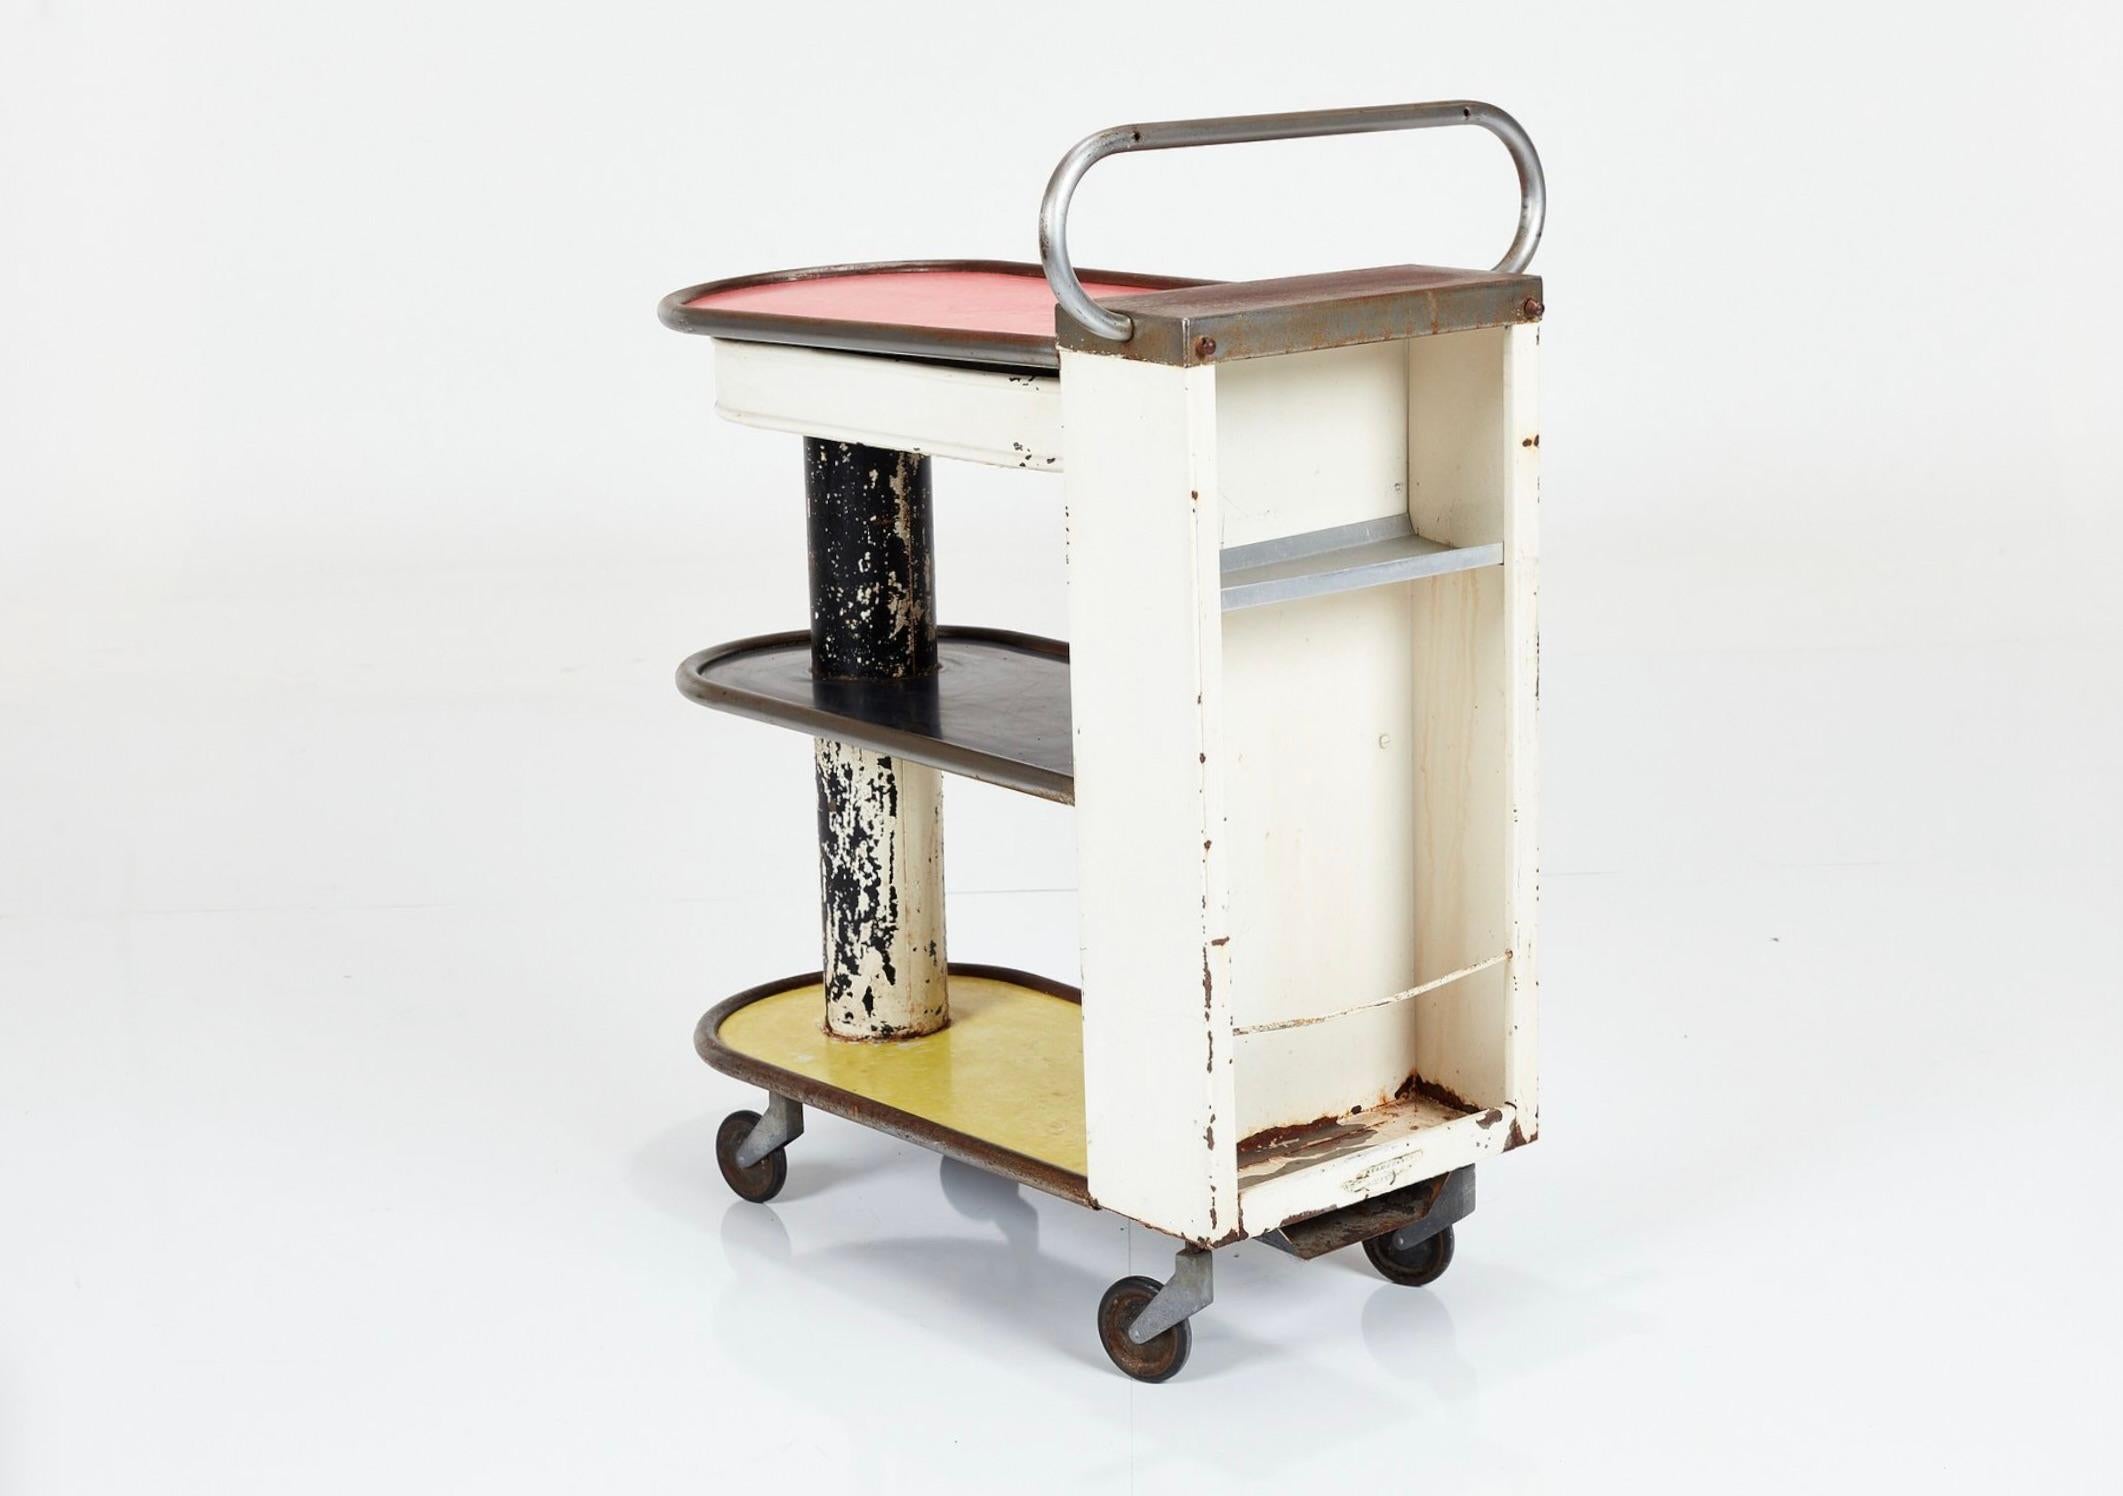 This vintage industrial cart, born in 1950s France, embodies an era of utilitarian elegance. Crafted from robust steel, its sturdy frame and weathered patina tell tales of decades past. Originally a workhorse in factories or warehouses, it now